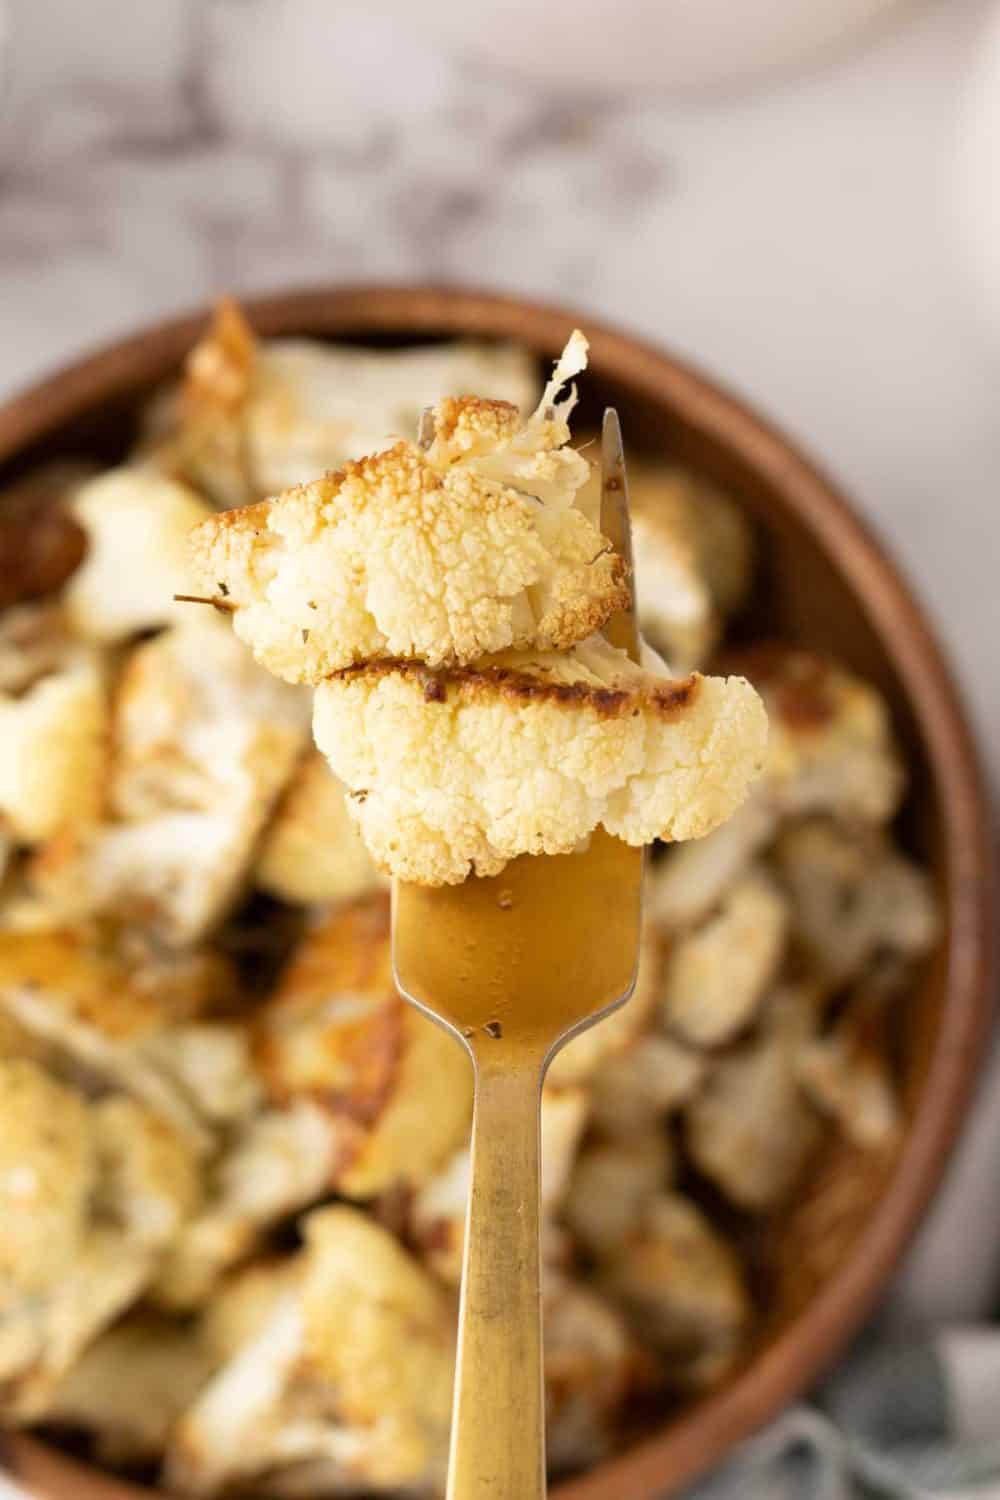 baked cauliflower florets on a fork over a a wooden bowl.